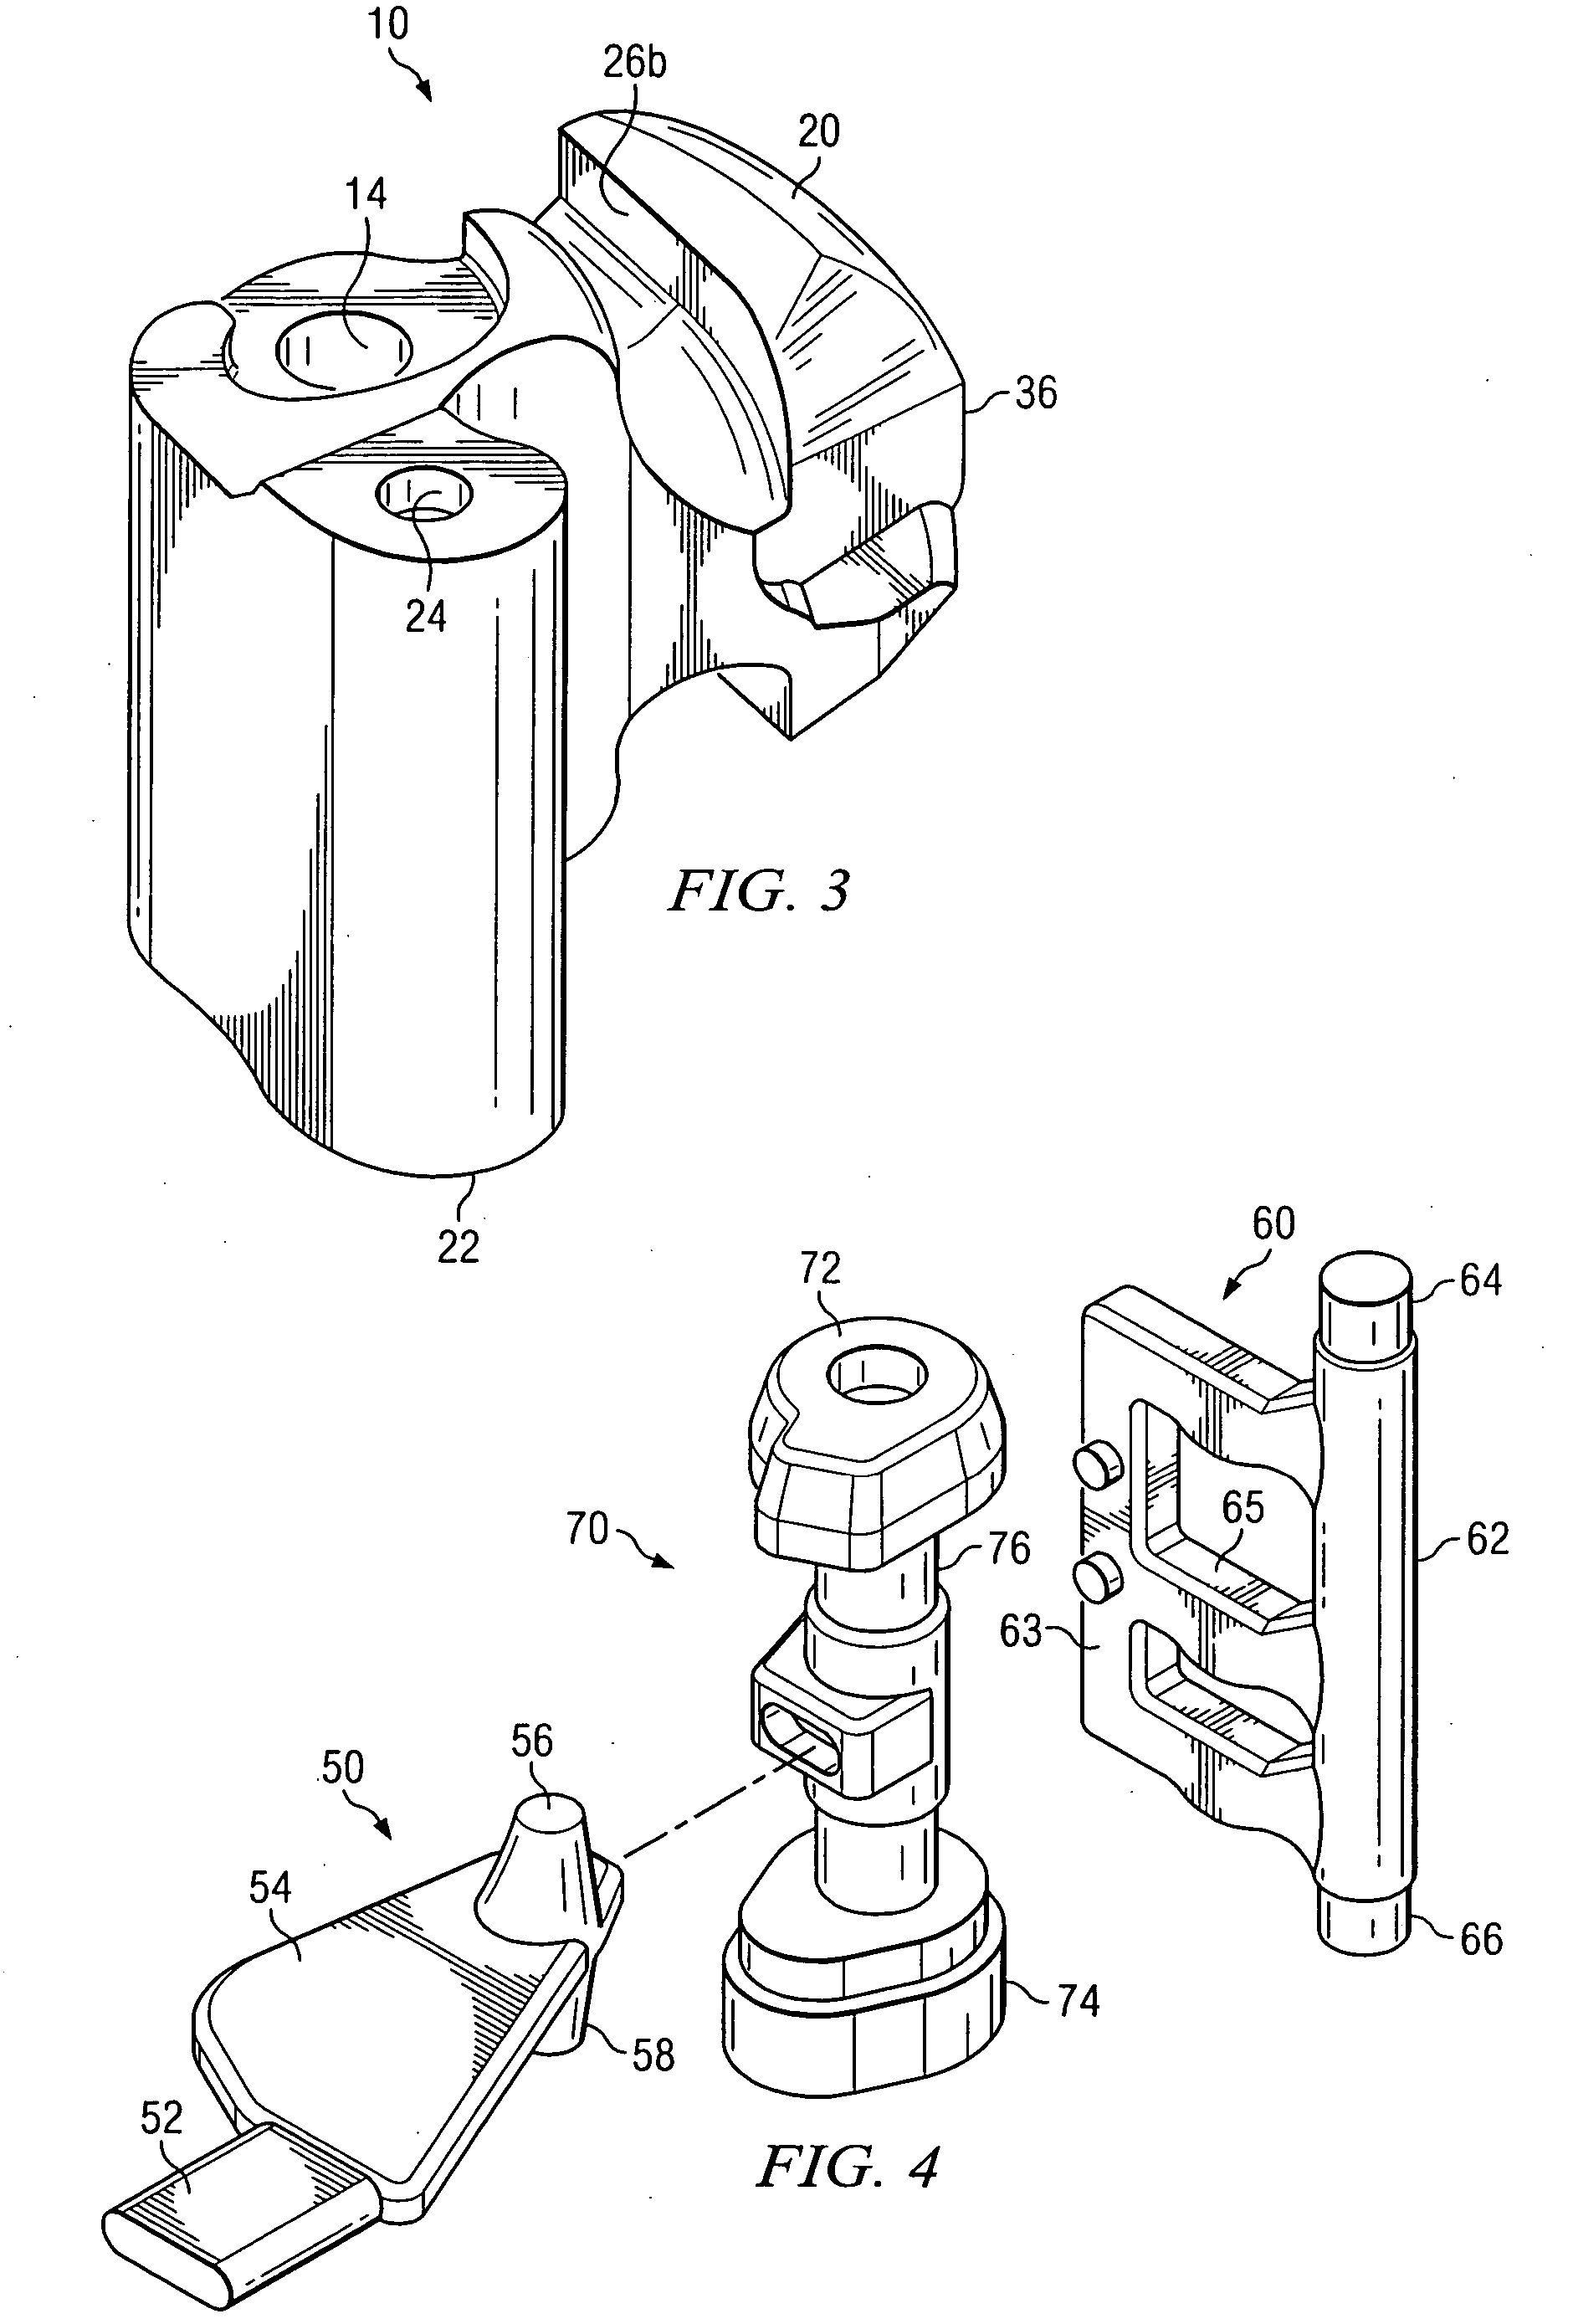 Method and system for manufacturing a coupler knuckle